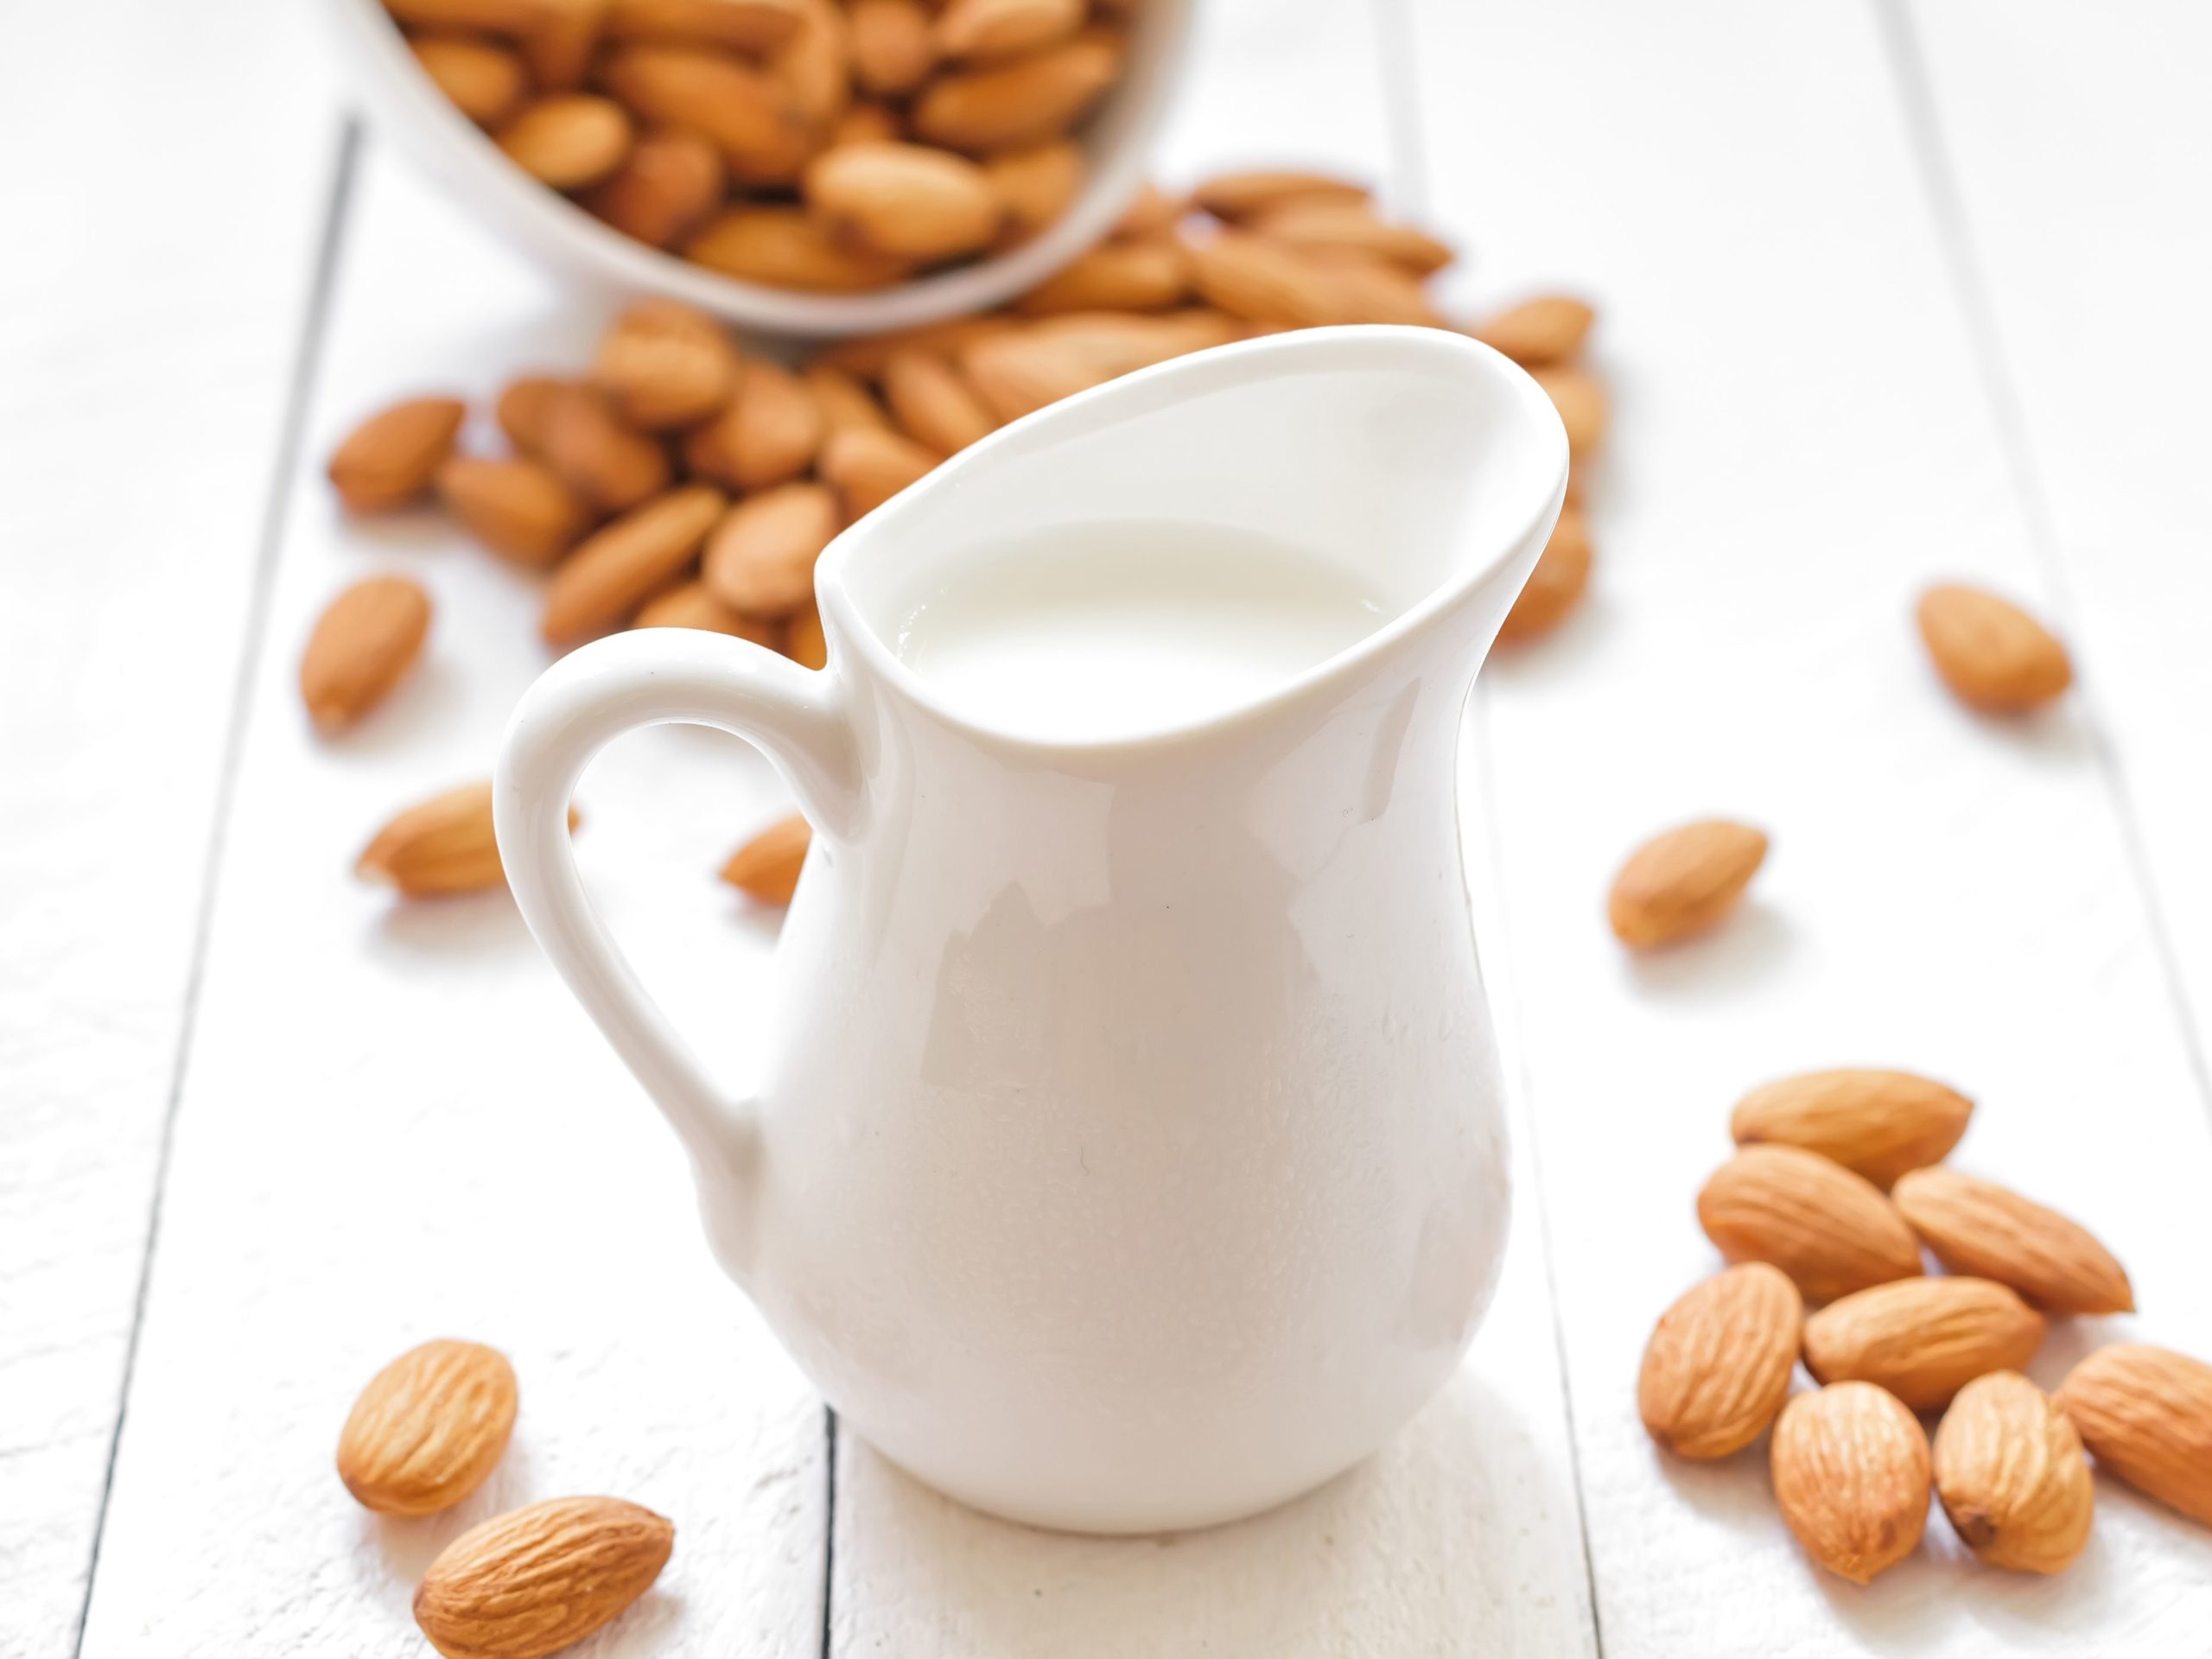 Can You Substitute Almond Milk for Milk